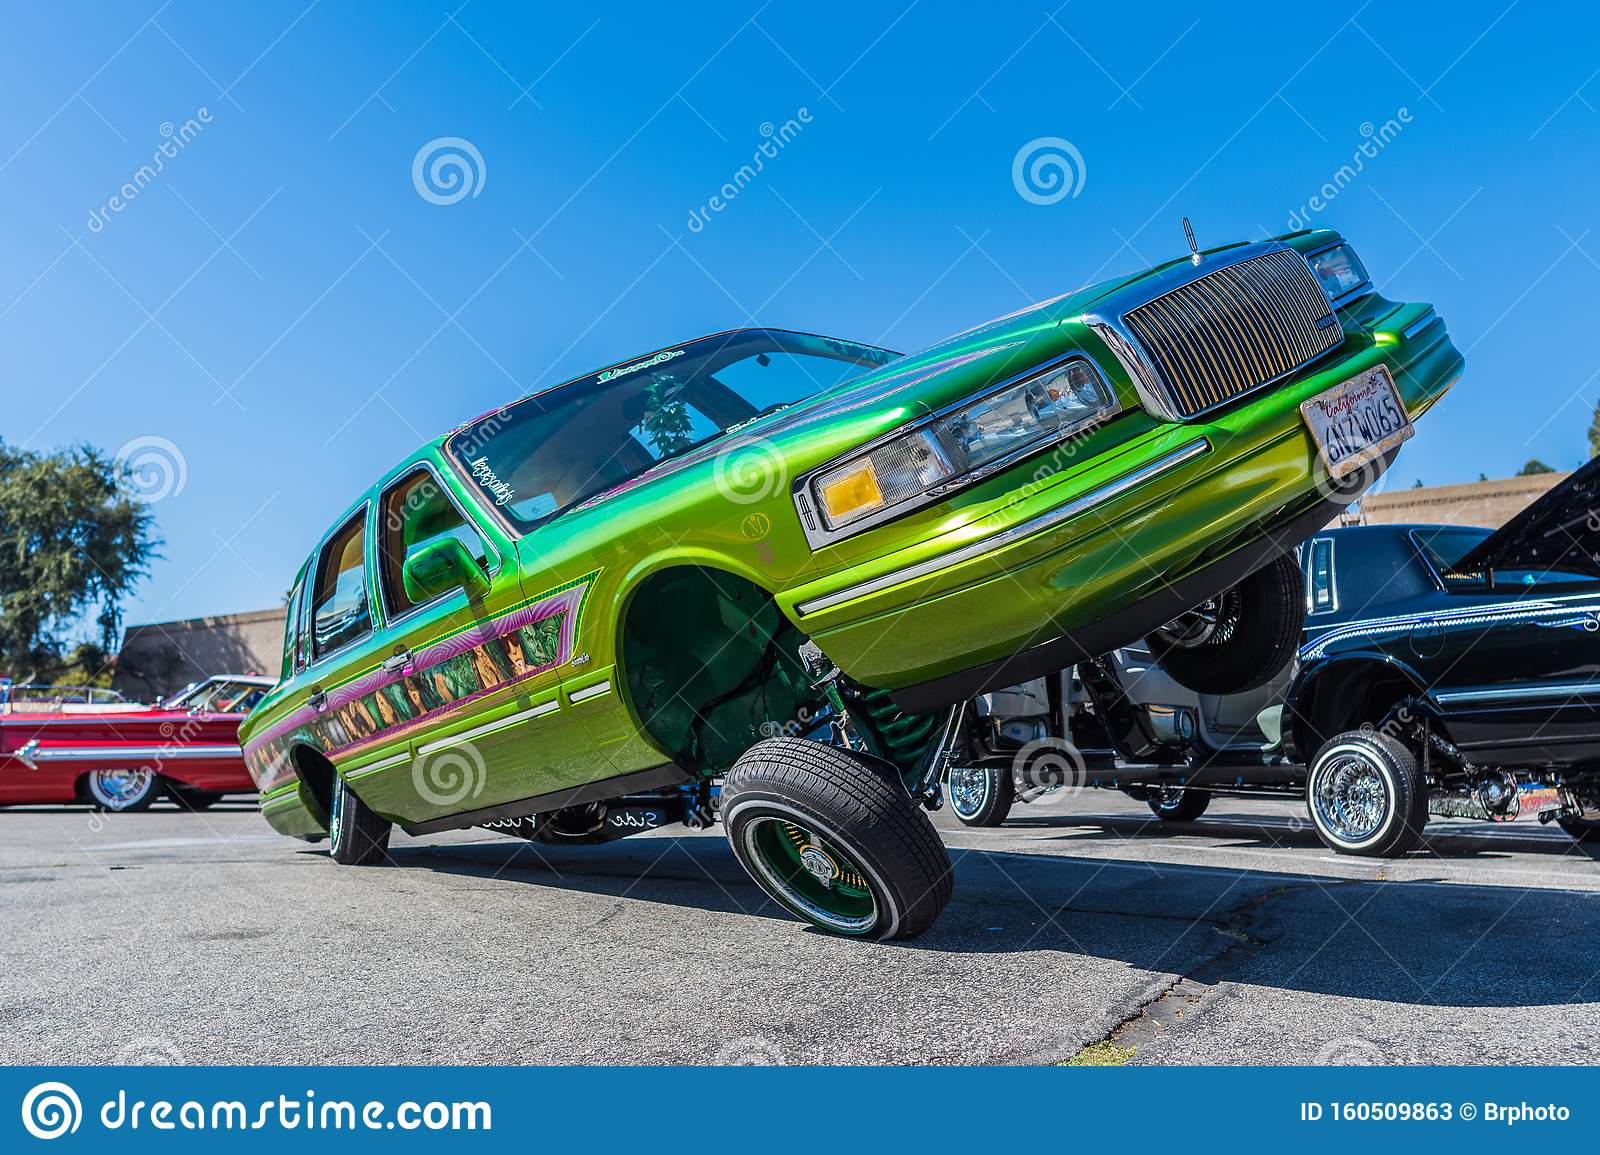 Lincoln Town Car Lowrider Suspensions on Display during Galpin Car Show  Editorial Stock Photo - Image of antique, front: 160509863